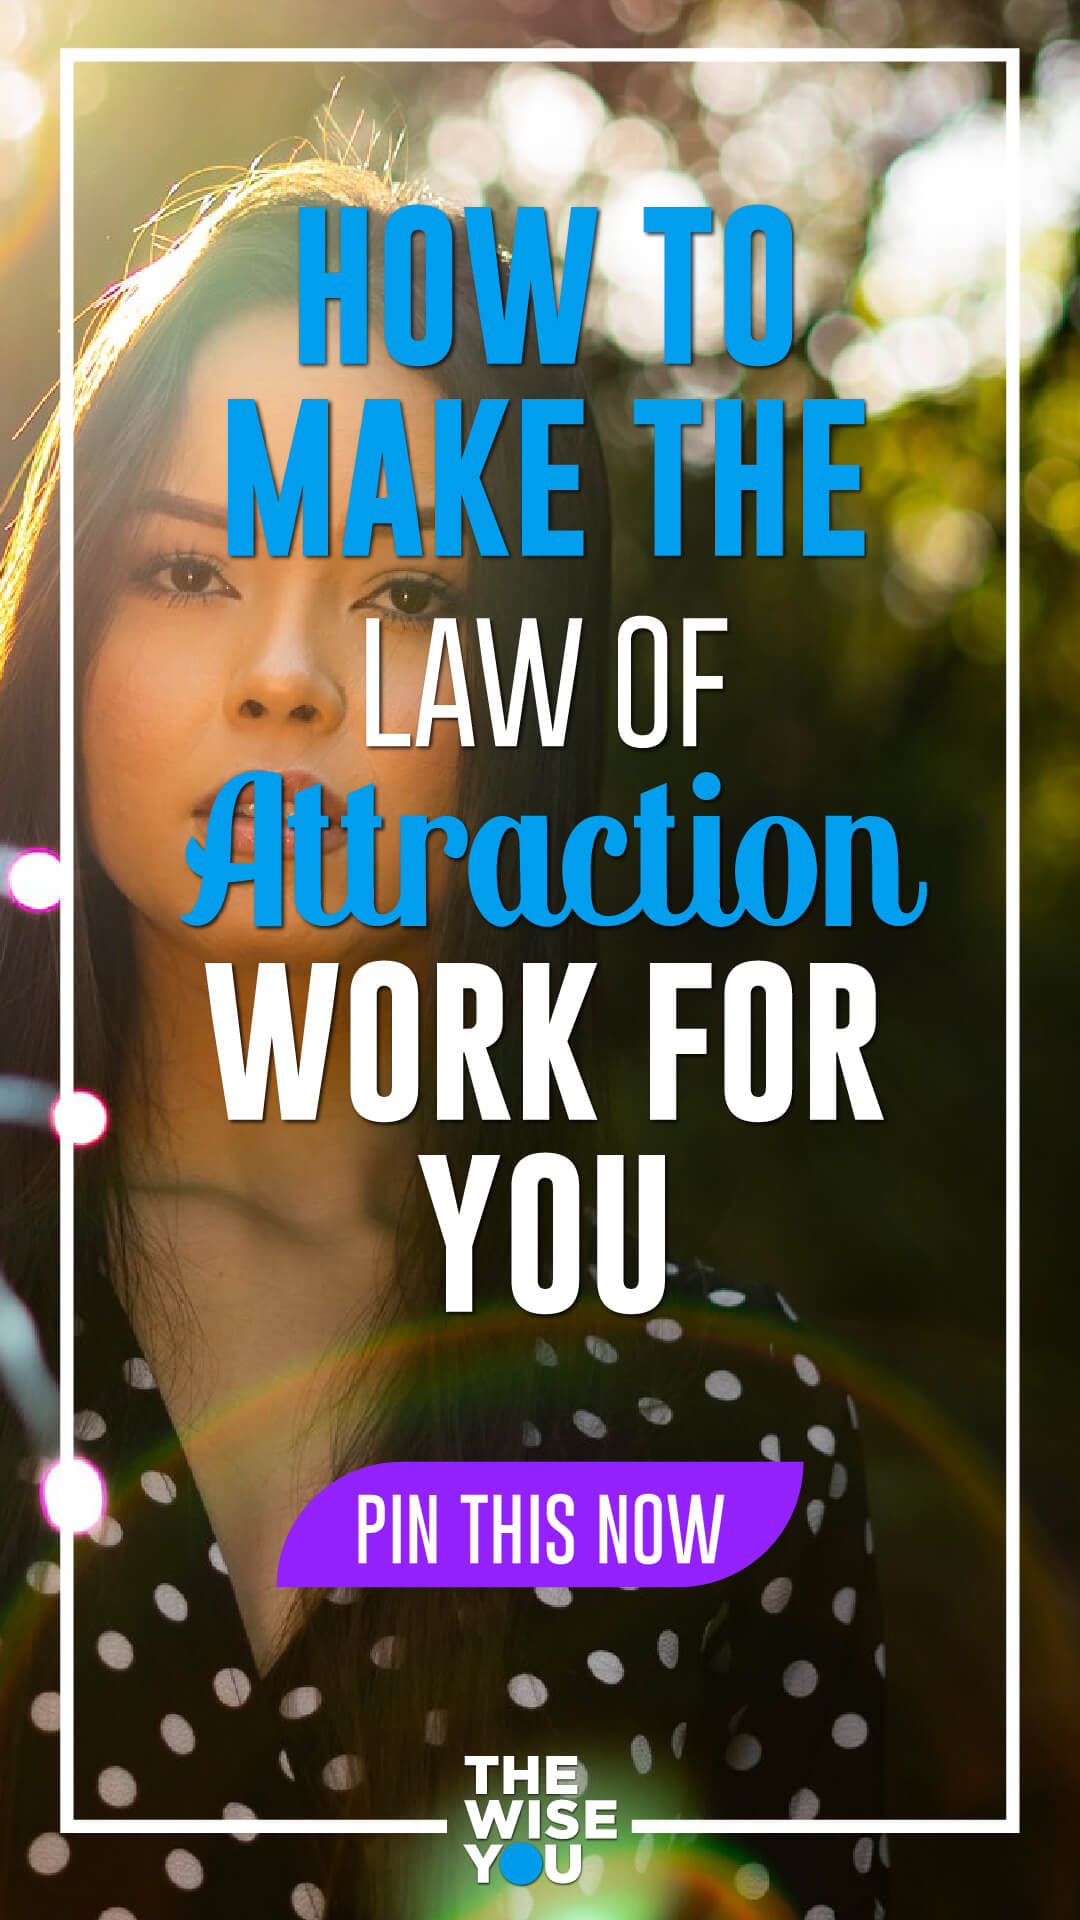 How to Make the Law of Attraction Work for You